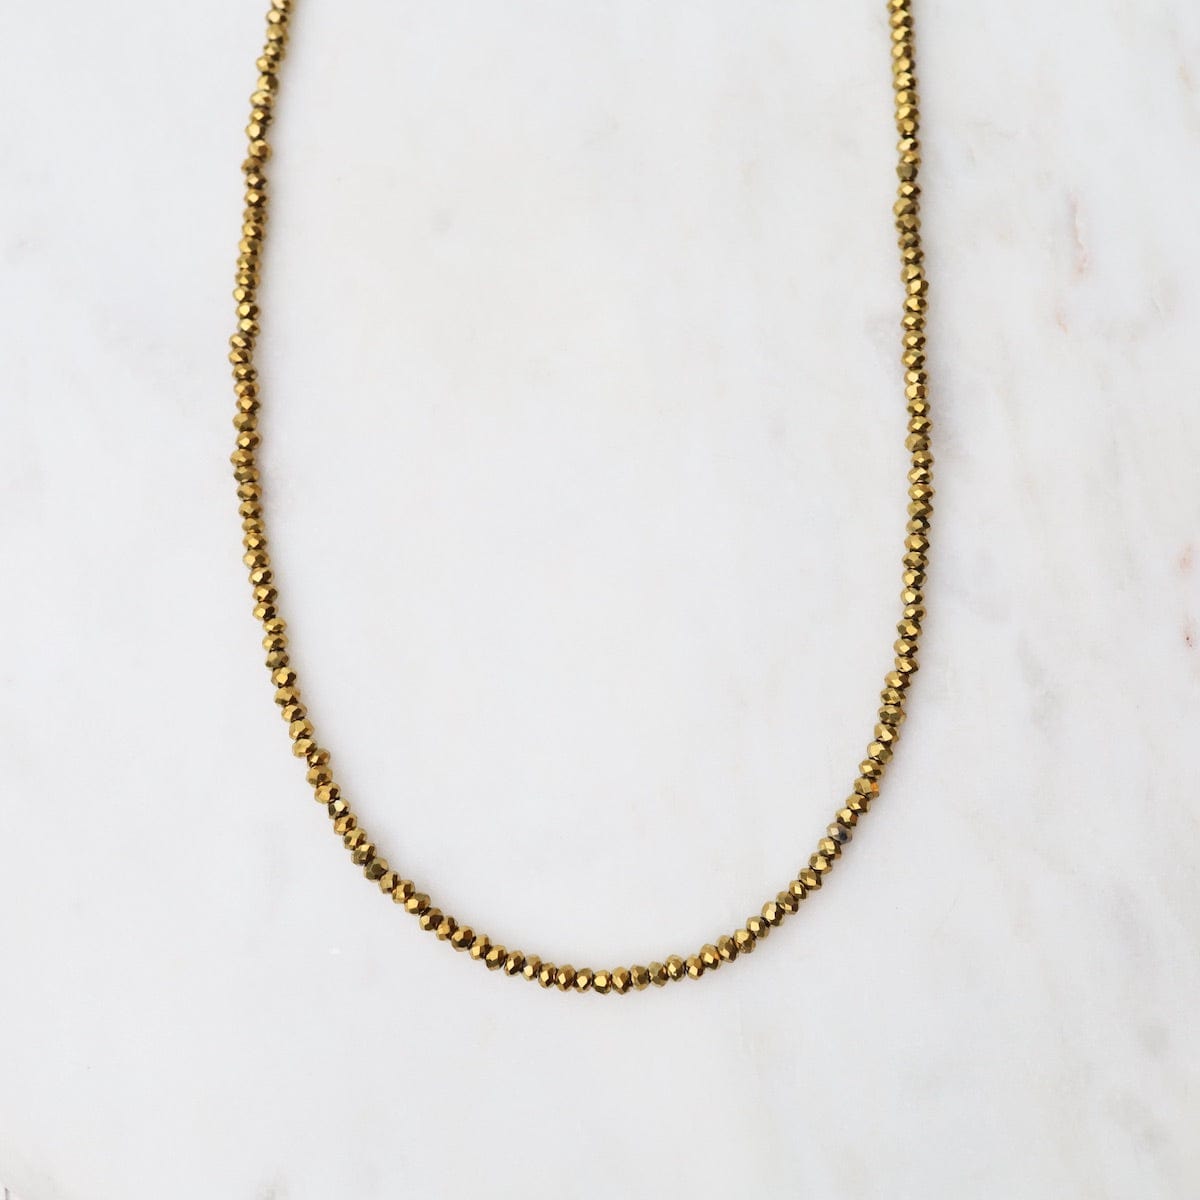 NKL Simple Stone Necklace - Gold Coated Pyrite